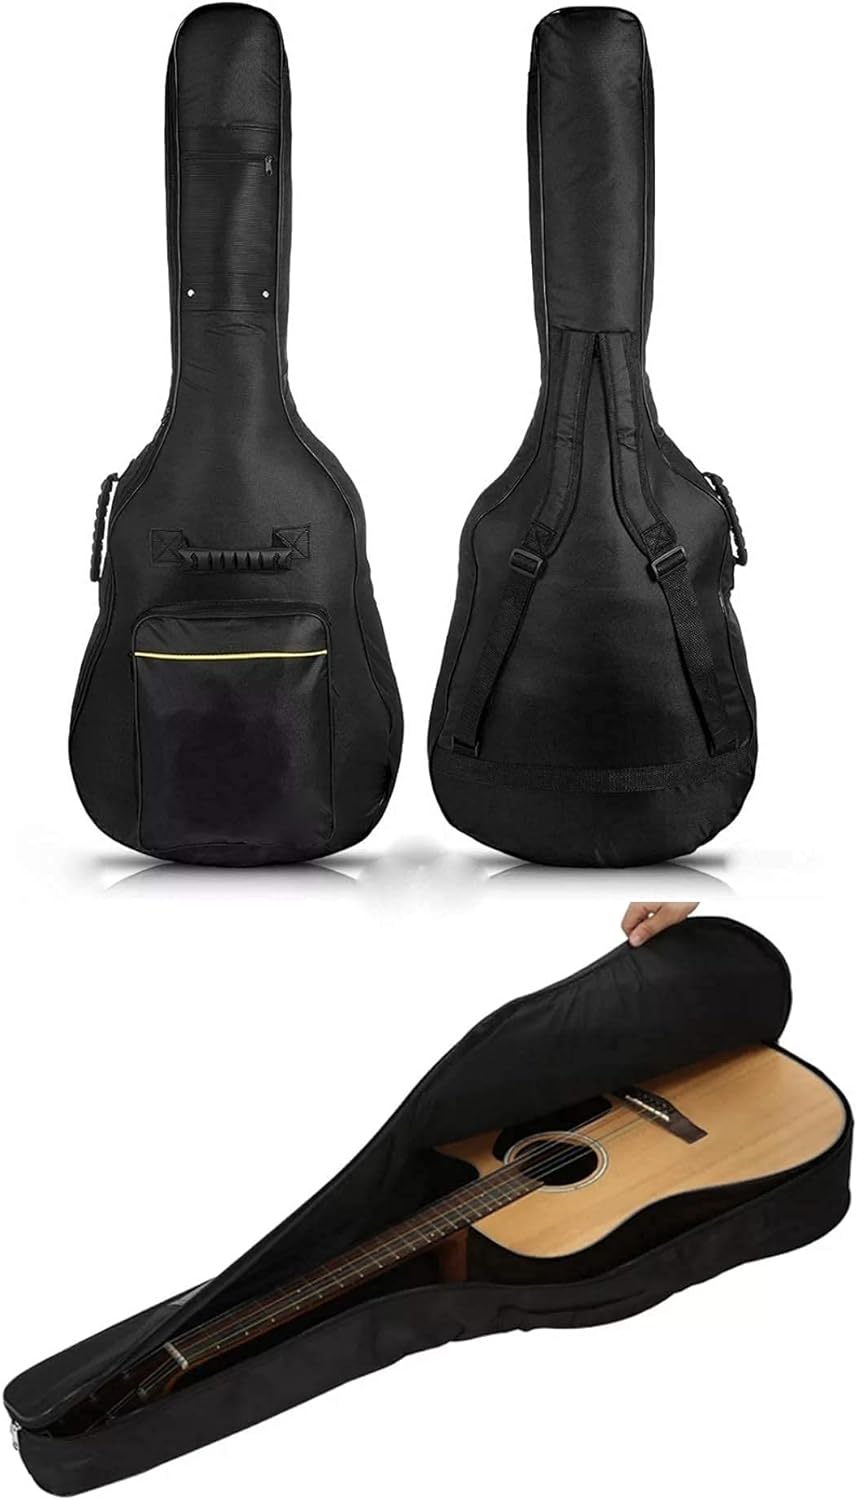 ADEPTNA Heavy Duty Full Size Padded Protective Waterproof Classical Acoustic Guitar Back Bag Carry Case-Fully Waterproof Cover, Foam Padding- Black